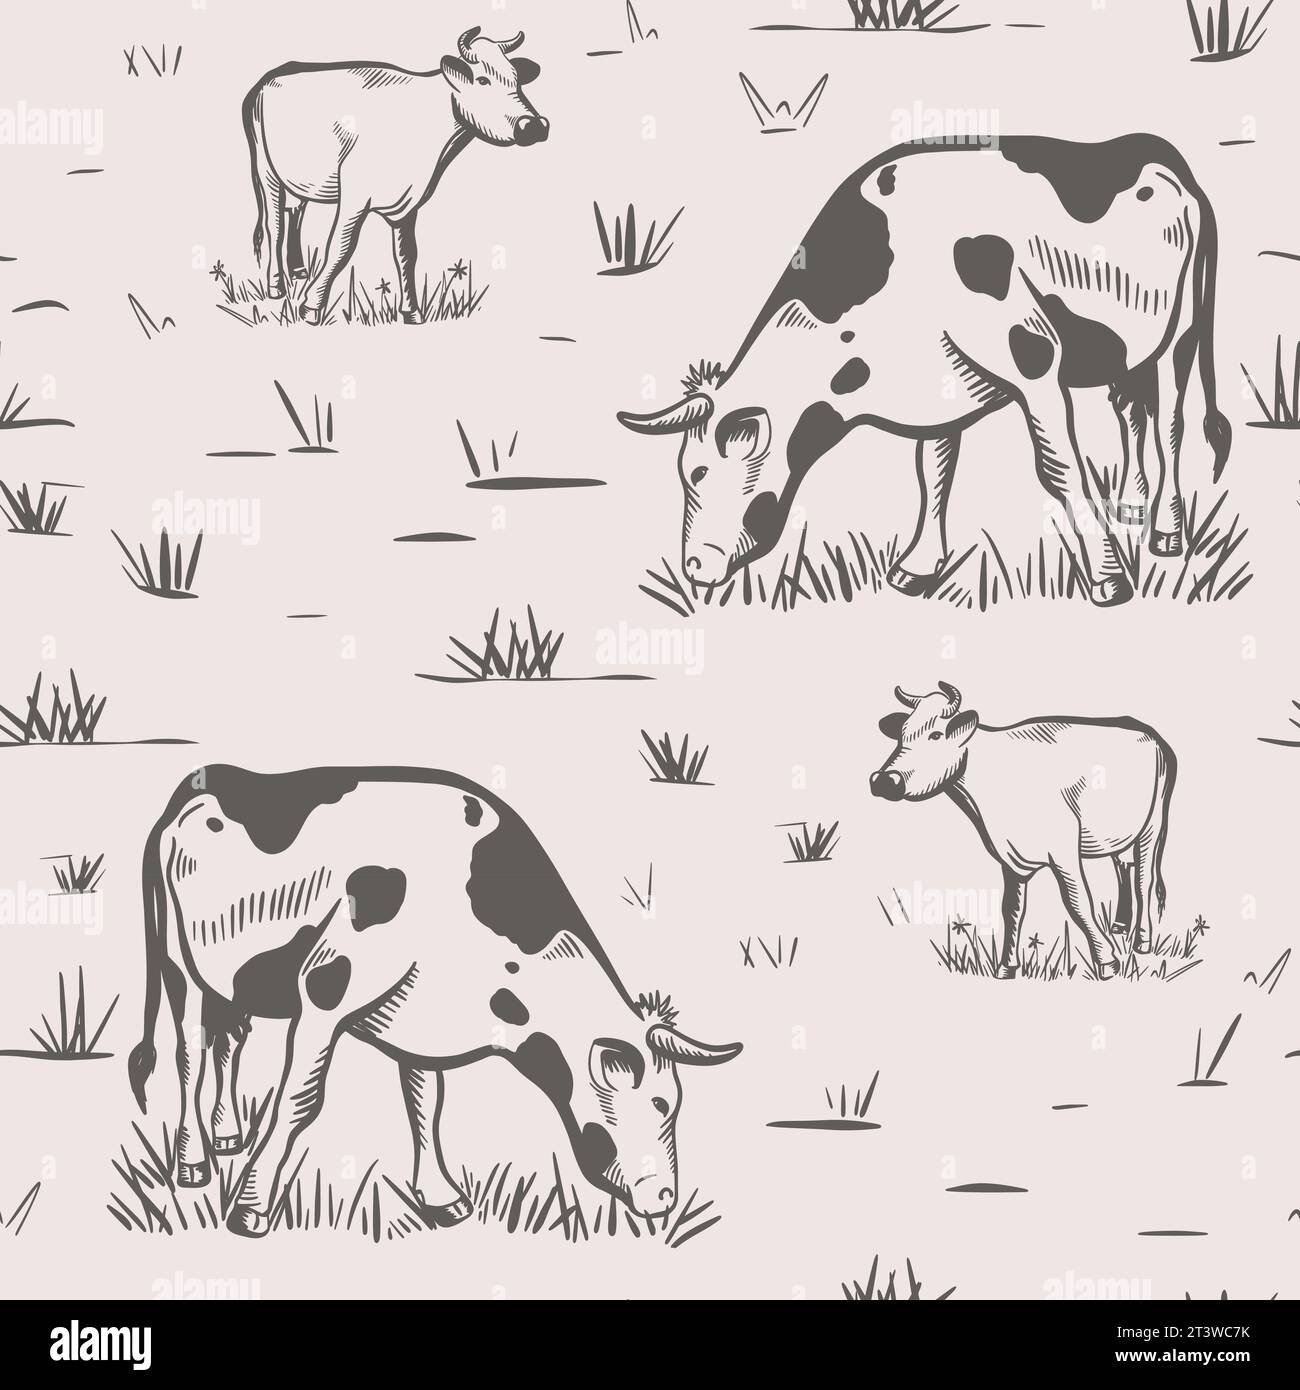 Cows grazing on meadow ink sketch seamless pattern Stock Vector